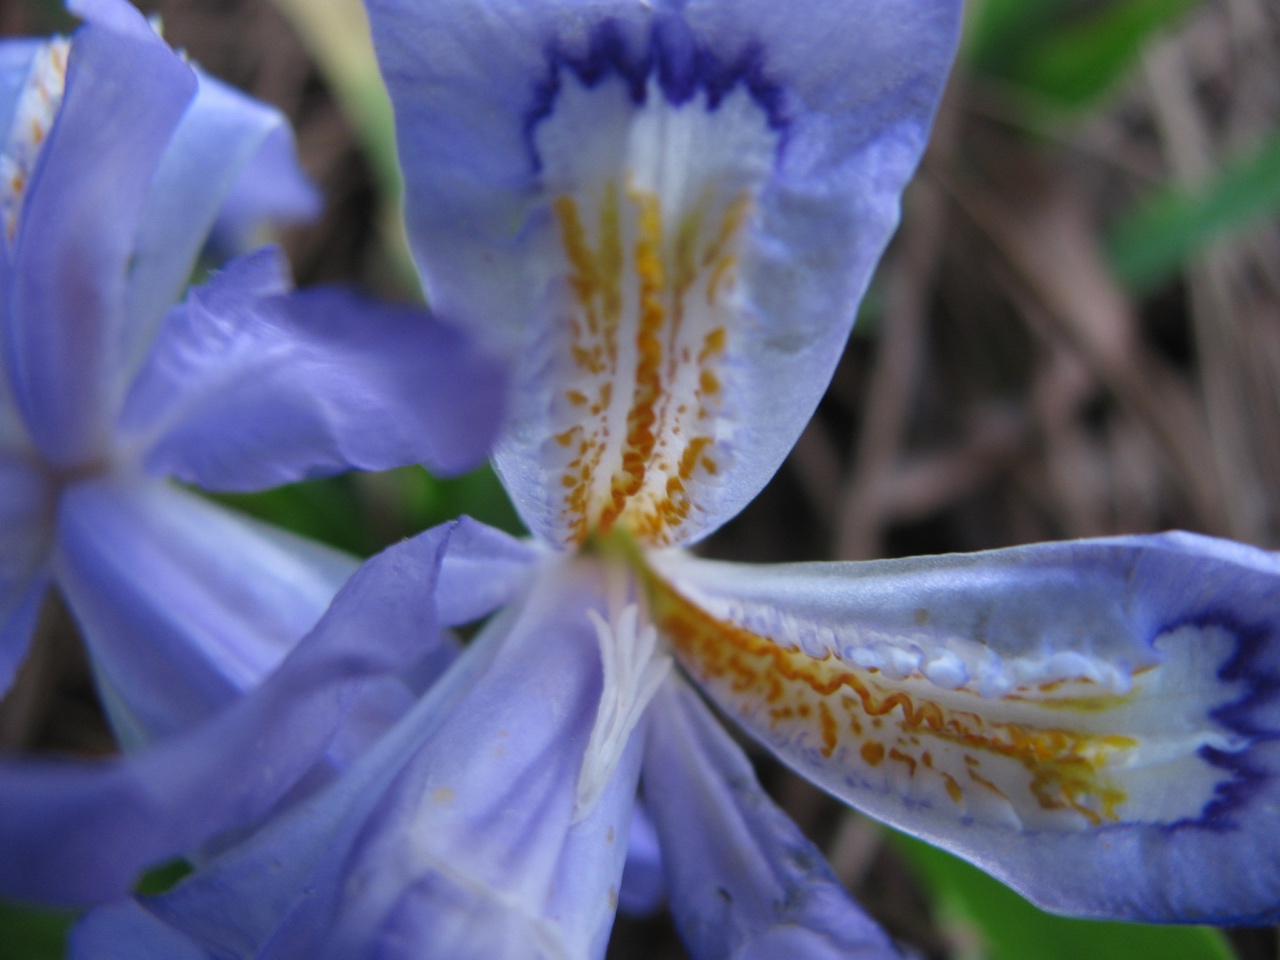 The Scientific Name is Iris cristata. You will likely hear them called Dwarf Crested Iris. This picture shows the Close-up of flower sepals showing the characteristic hairy yellow crest.  I. verna also has a yellow band  but this band is much larger and  smooth.  of Iris cristata